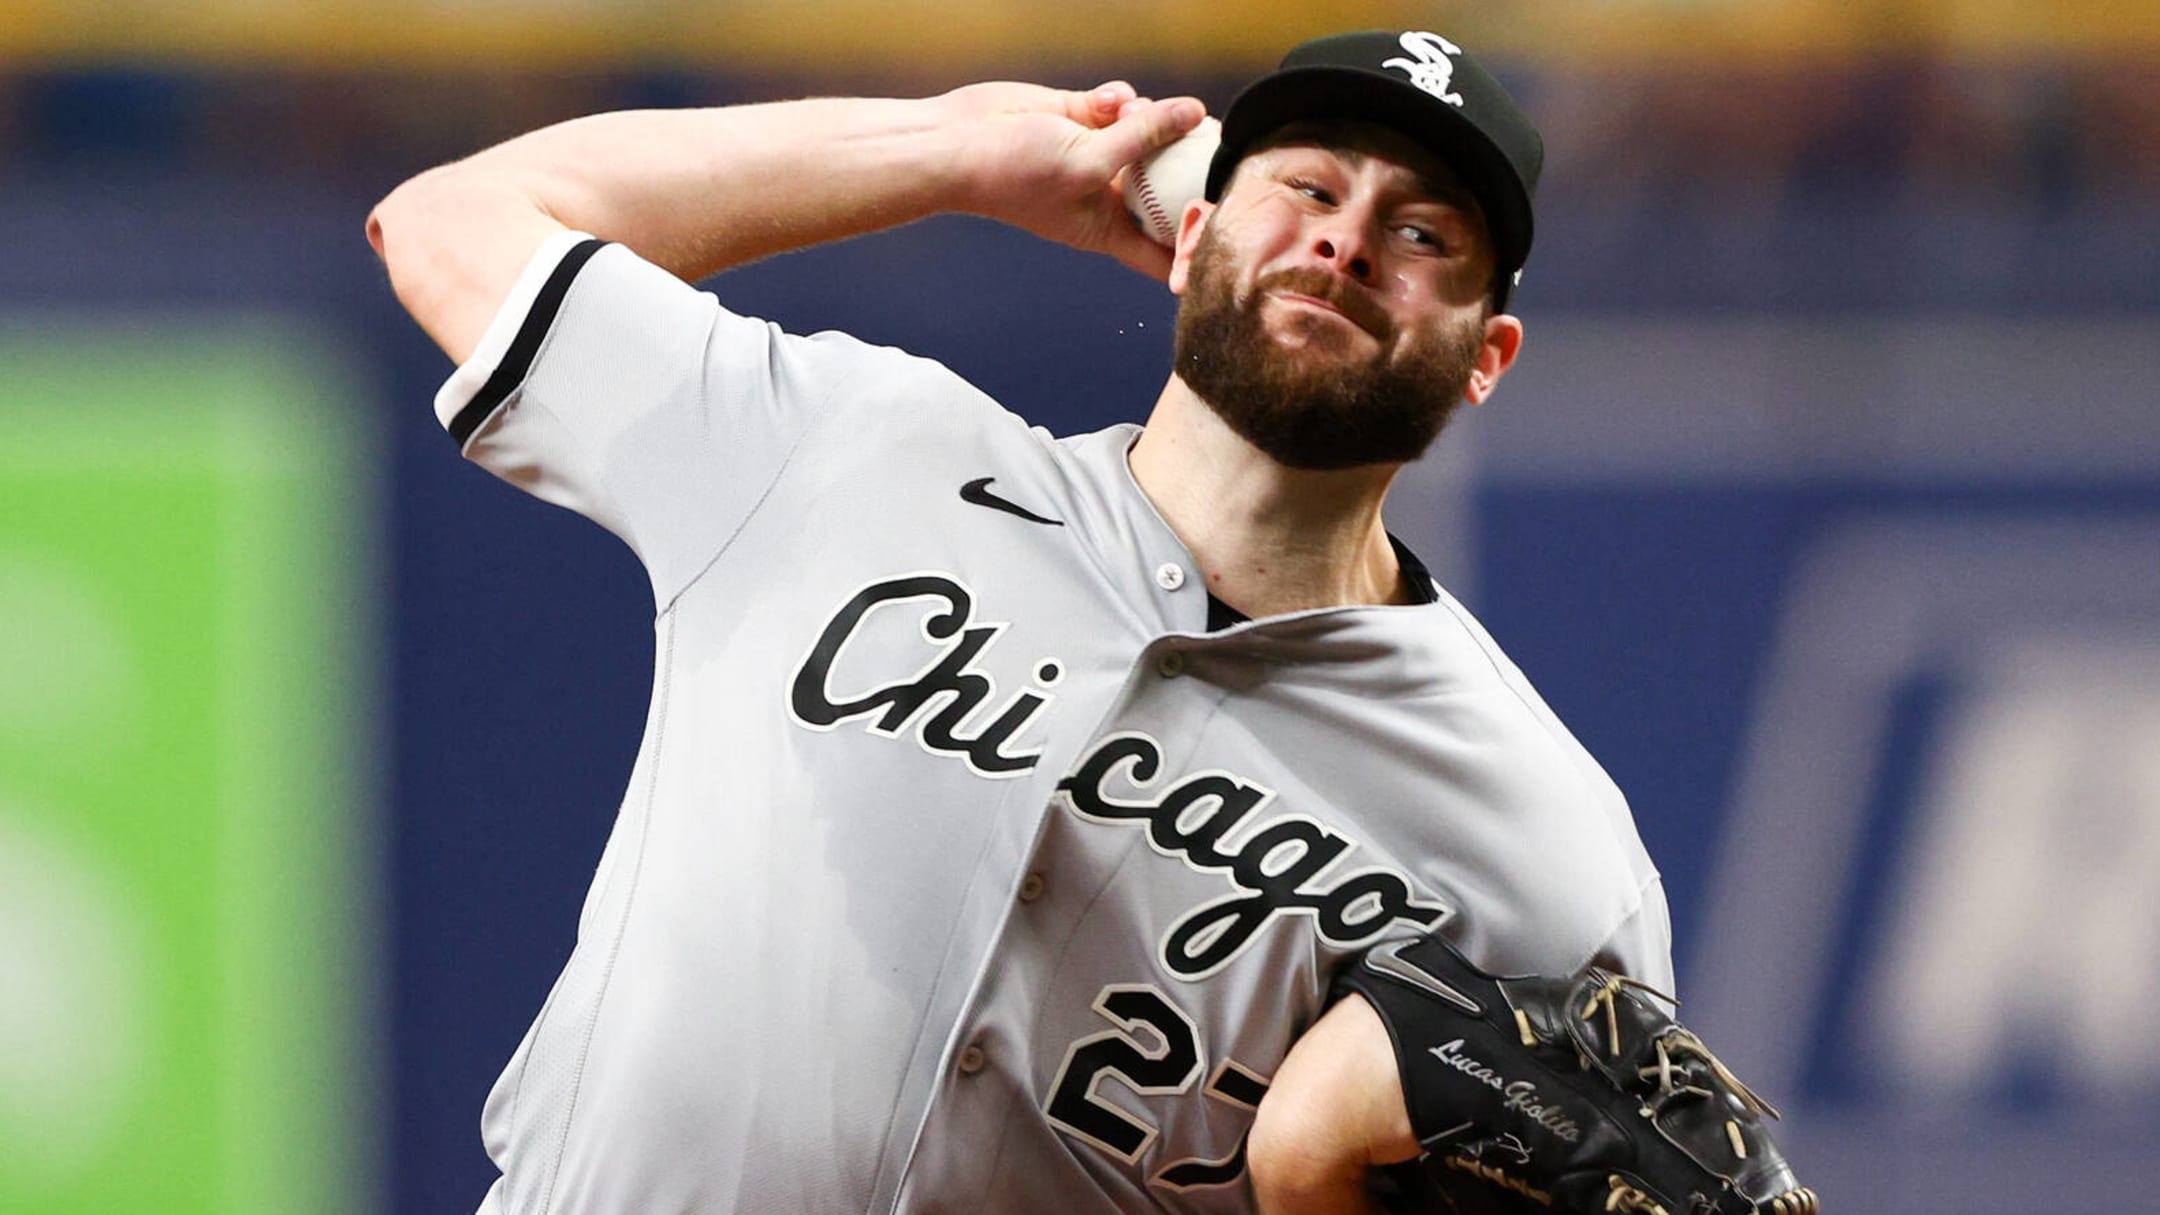 Could White Sox RHP Lucas Giolito be this season's Jose Berrios